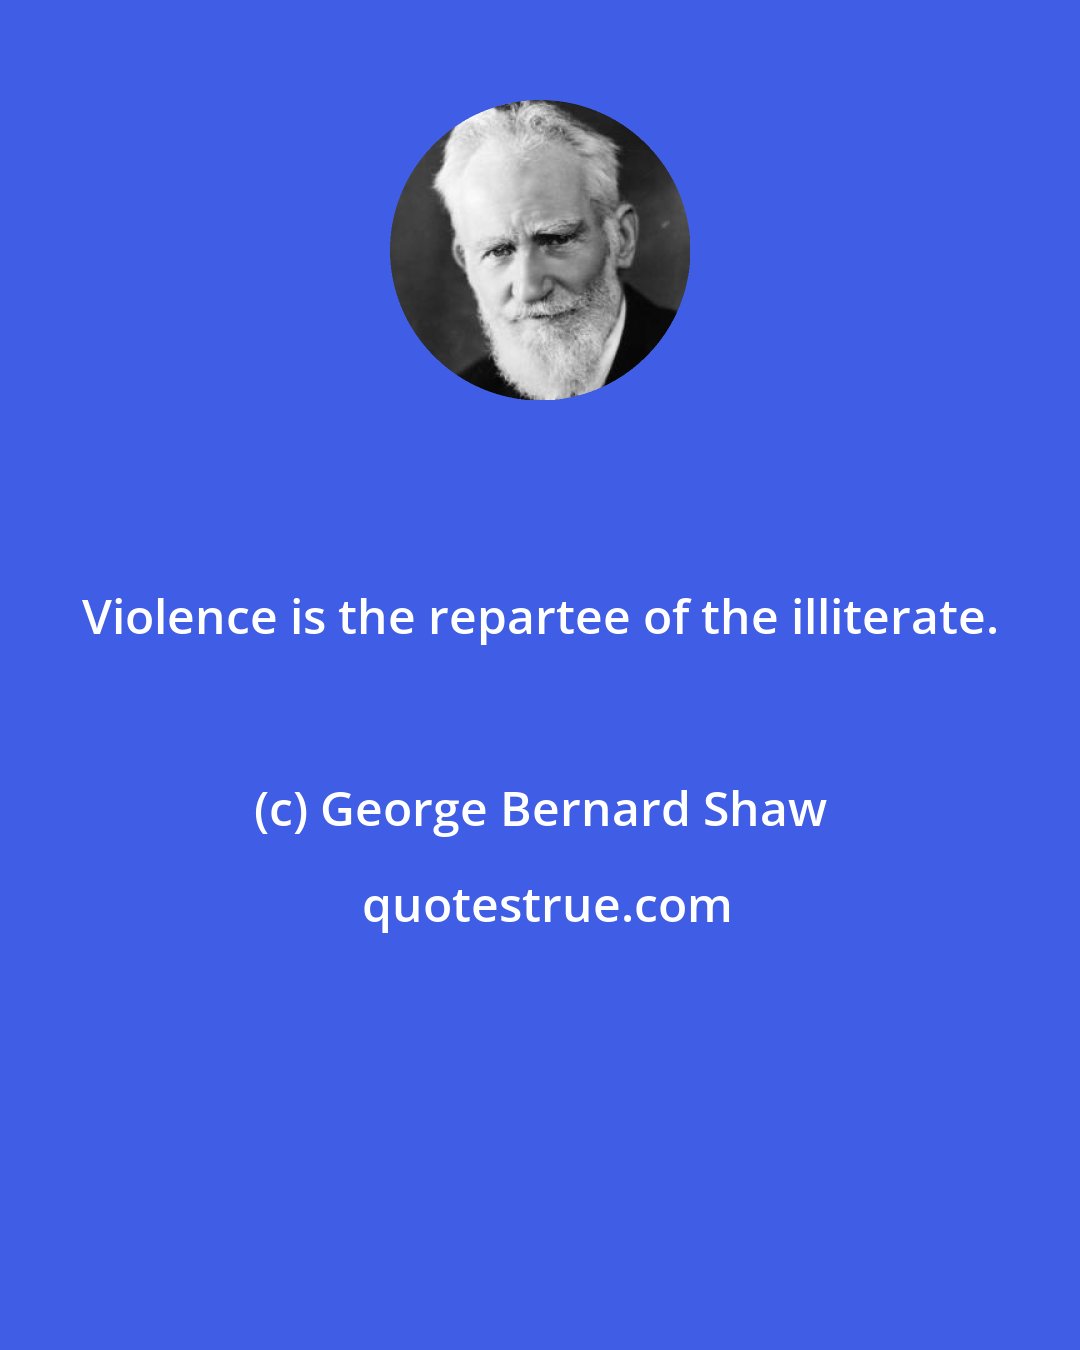 George Bernard Shaw: Violence is the repartee of the illiterate.